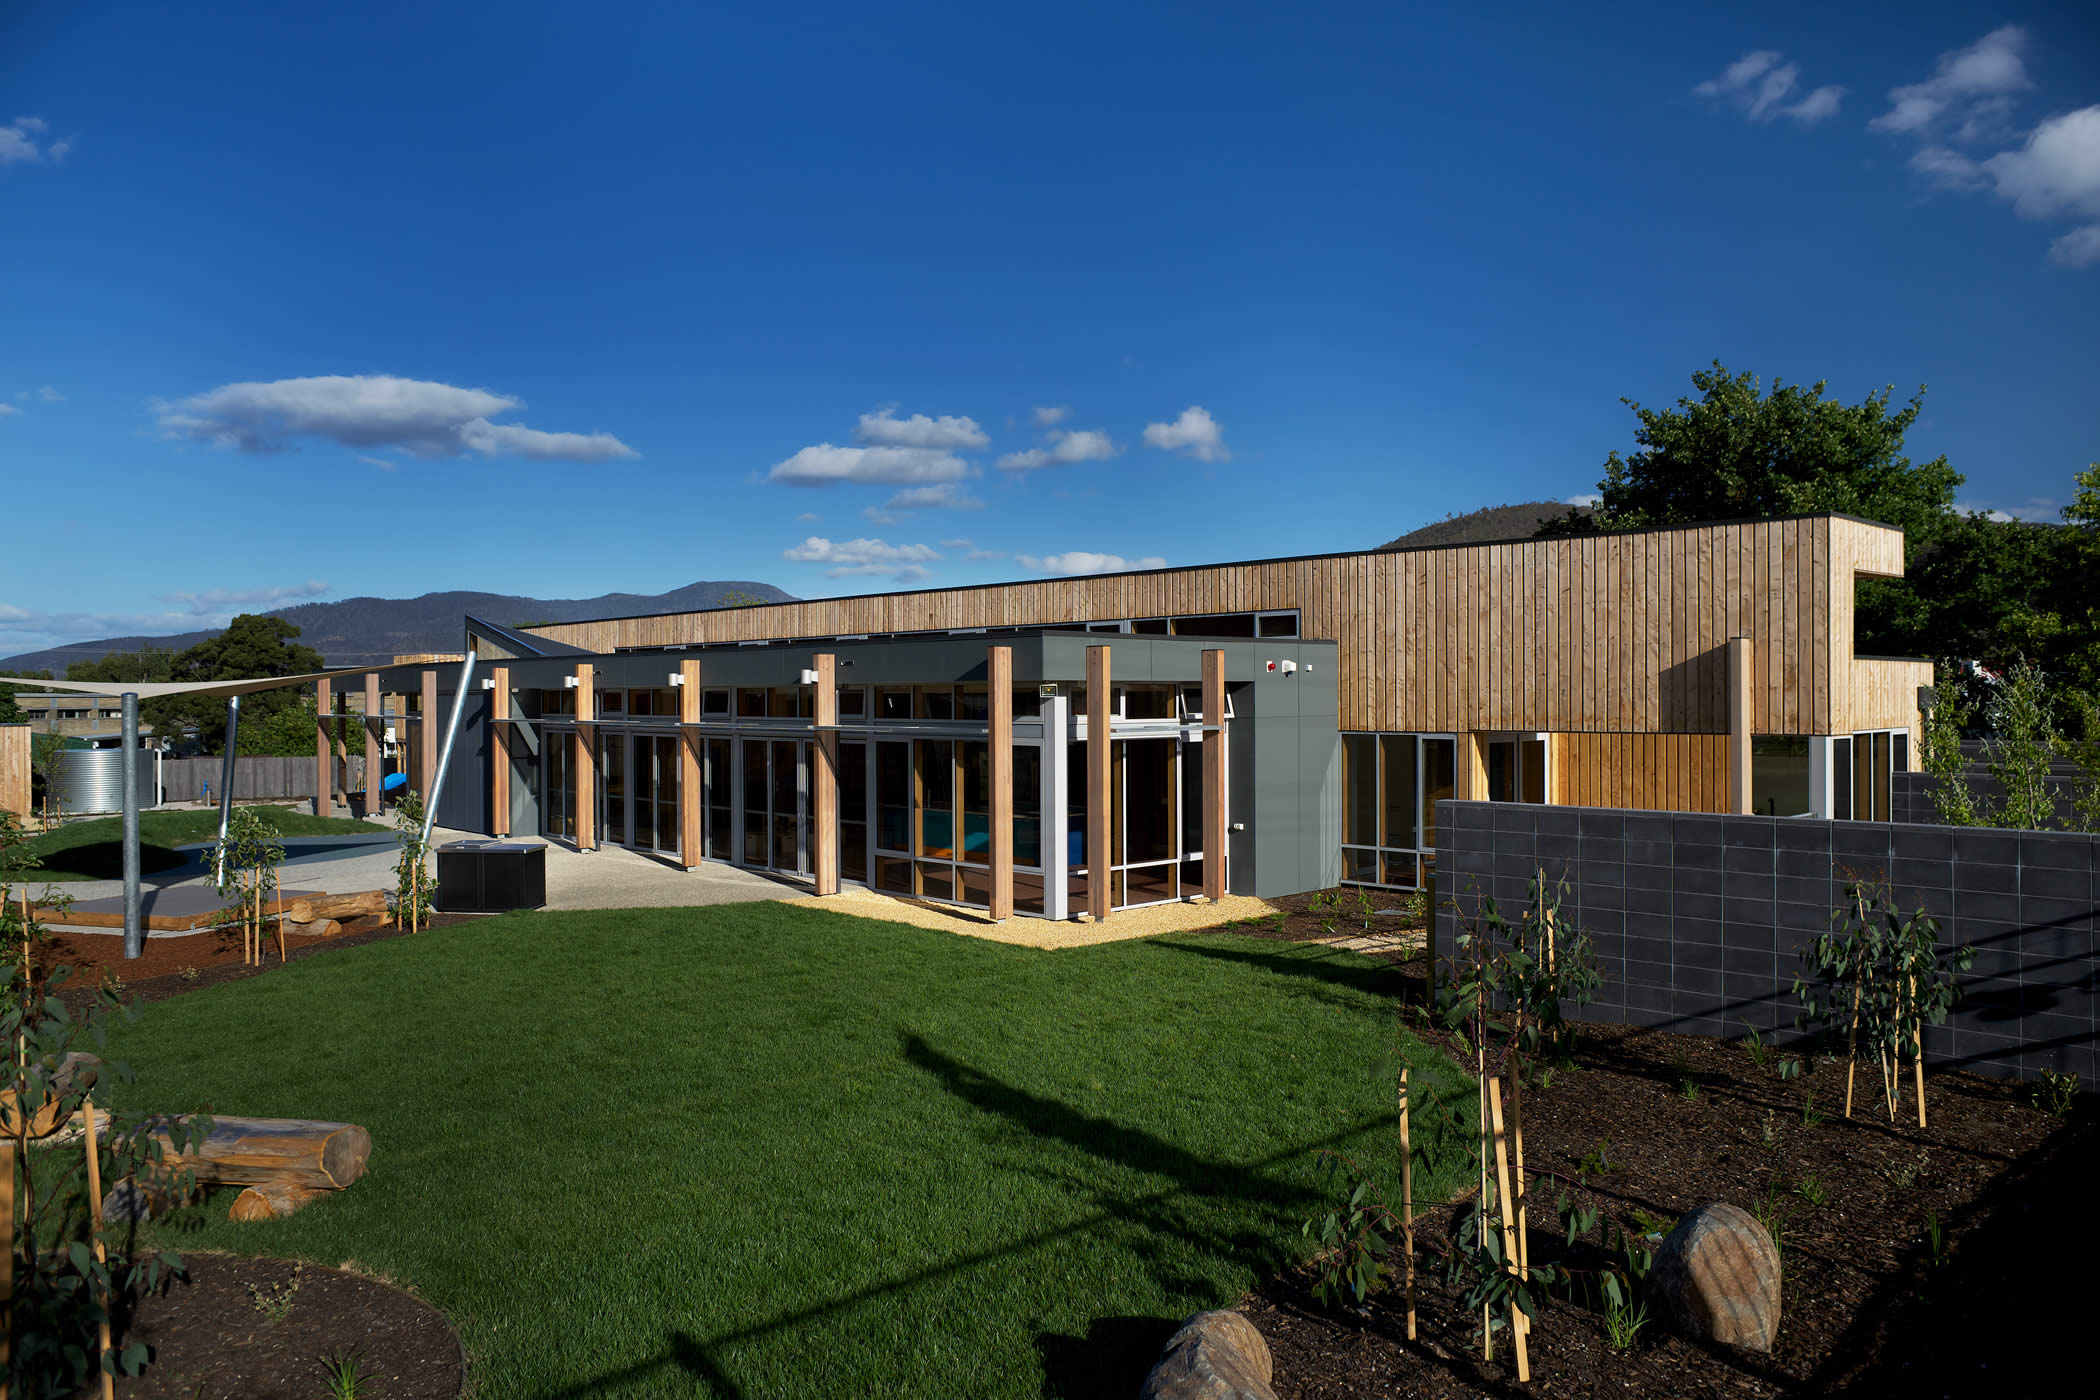 Ptunarra Child and Family Centre (CFC), New Norfolk, Tasmania: The external facades are clad in macrocarpa timber with minimal applied finishes to achieve the building’s low carbon footprint. Photo by Ray Joyce.